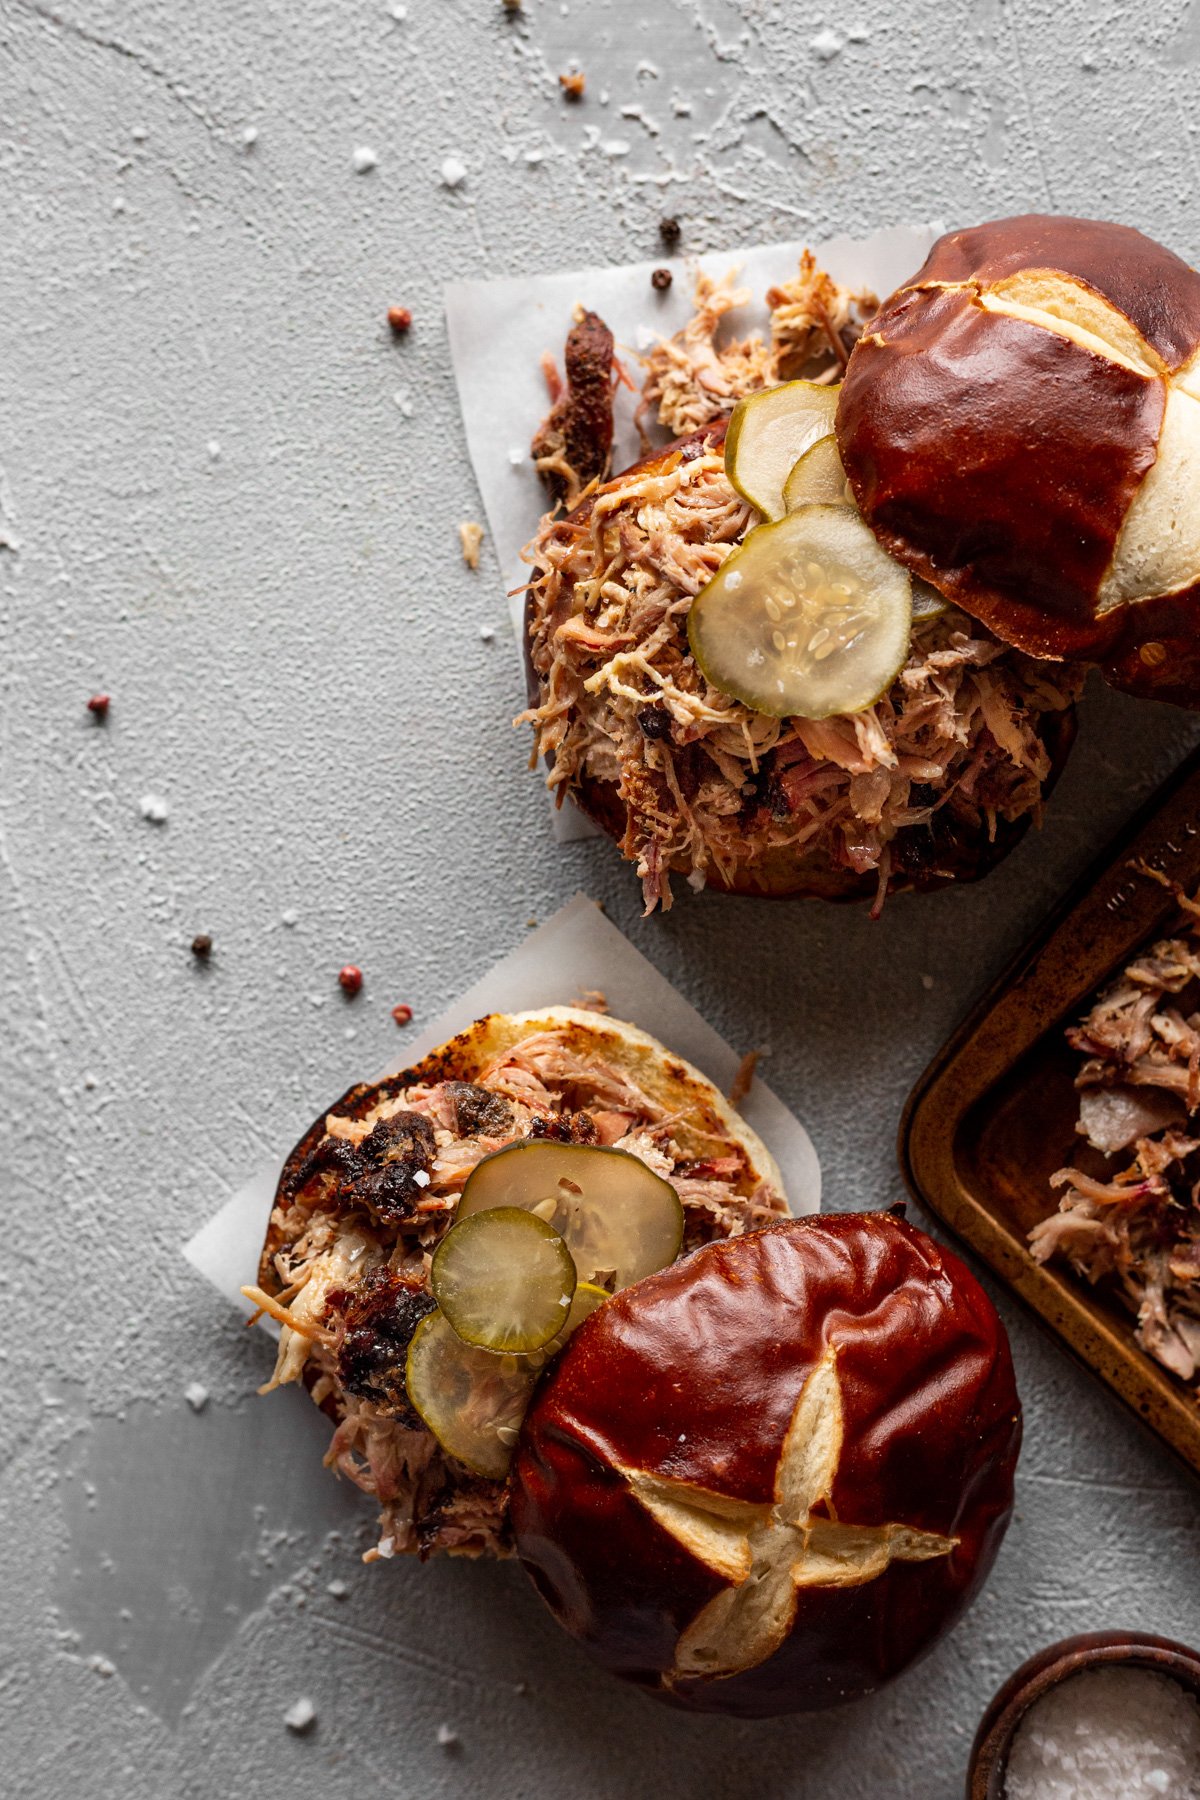 smoked pulled pork on pretzel buns with pickles